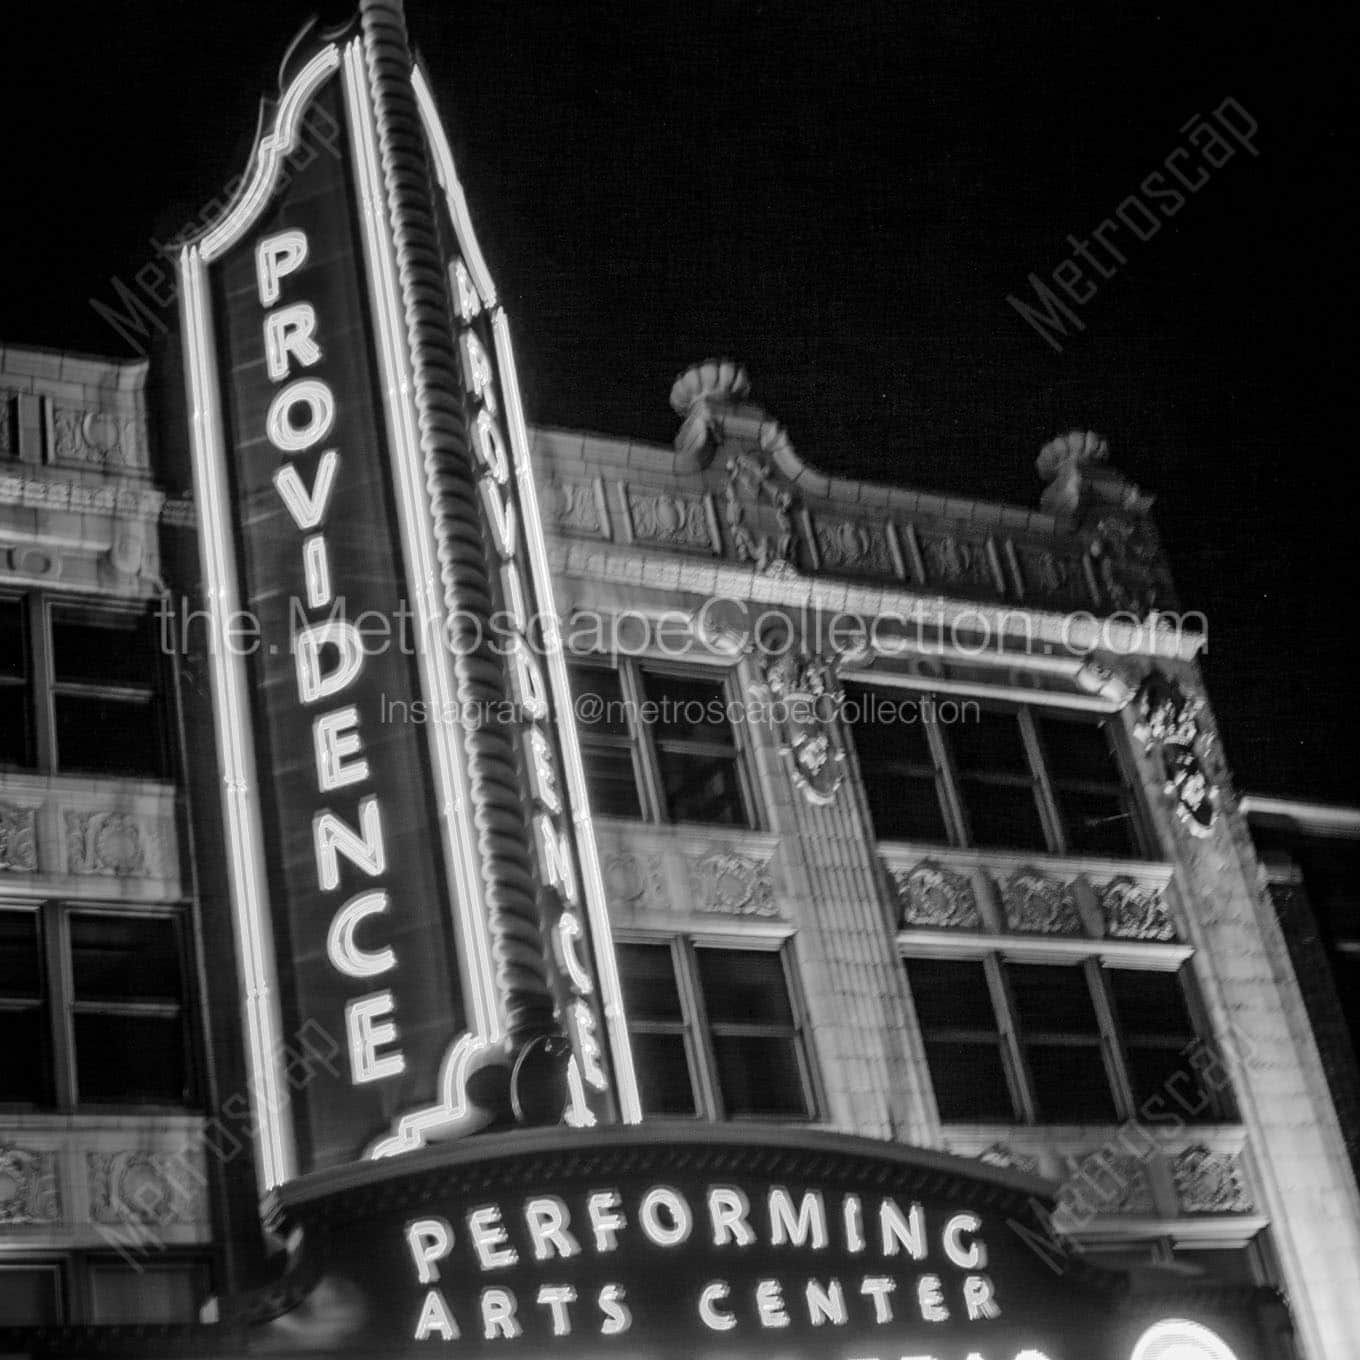 providence performing arts center sign Black & White Wall Art